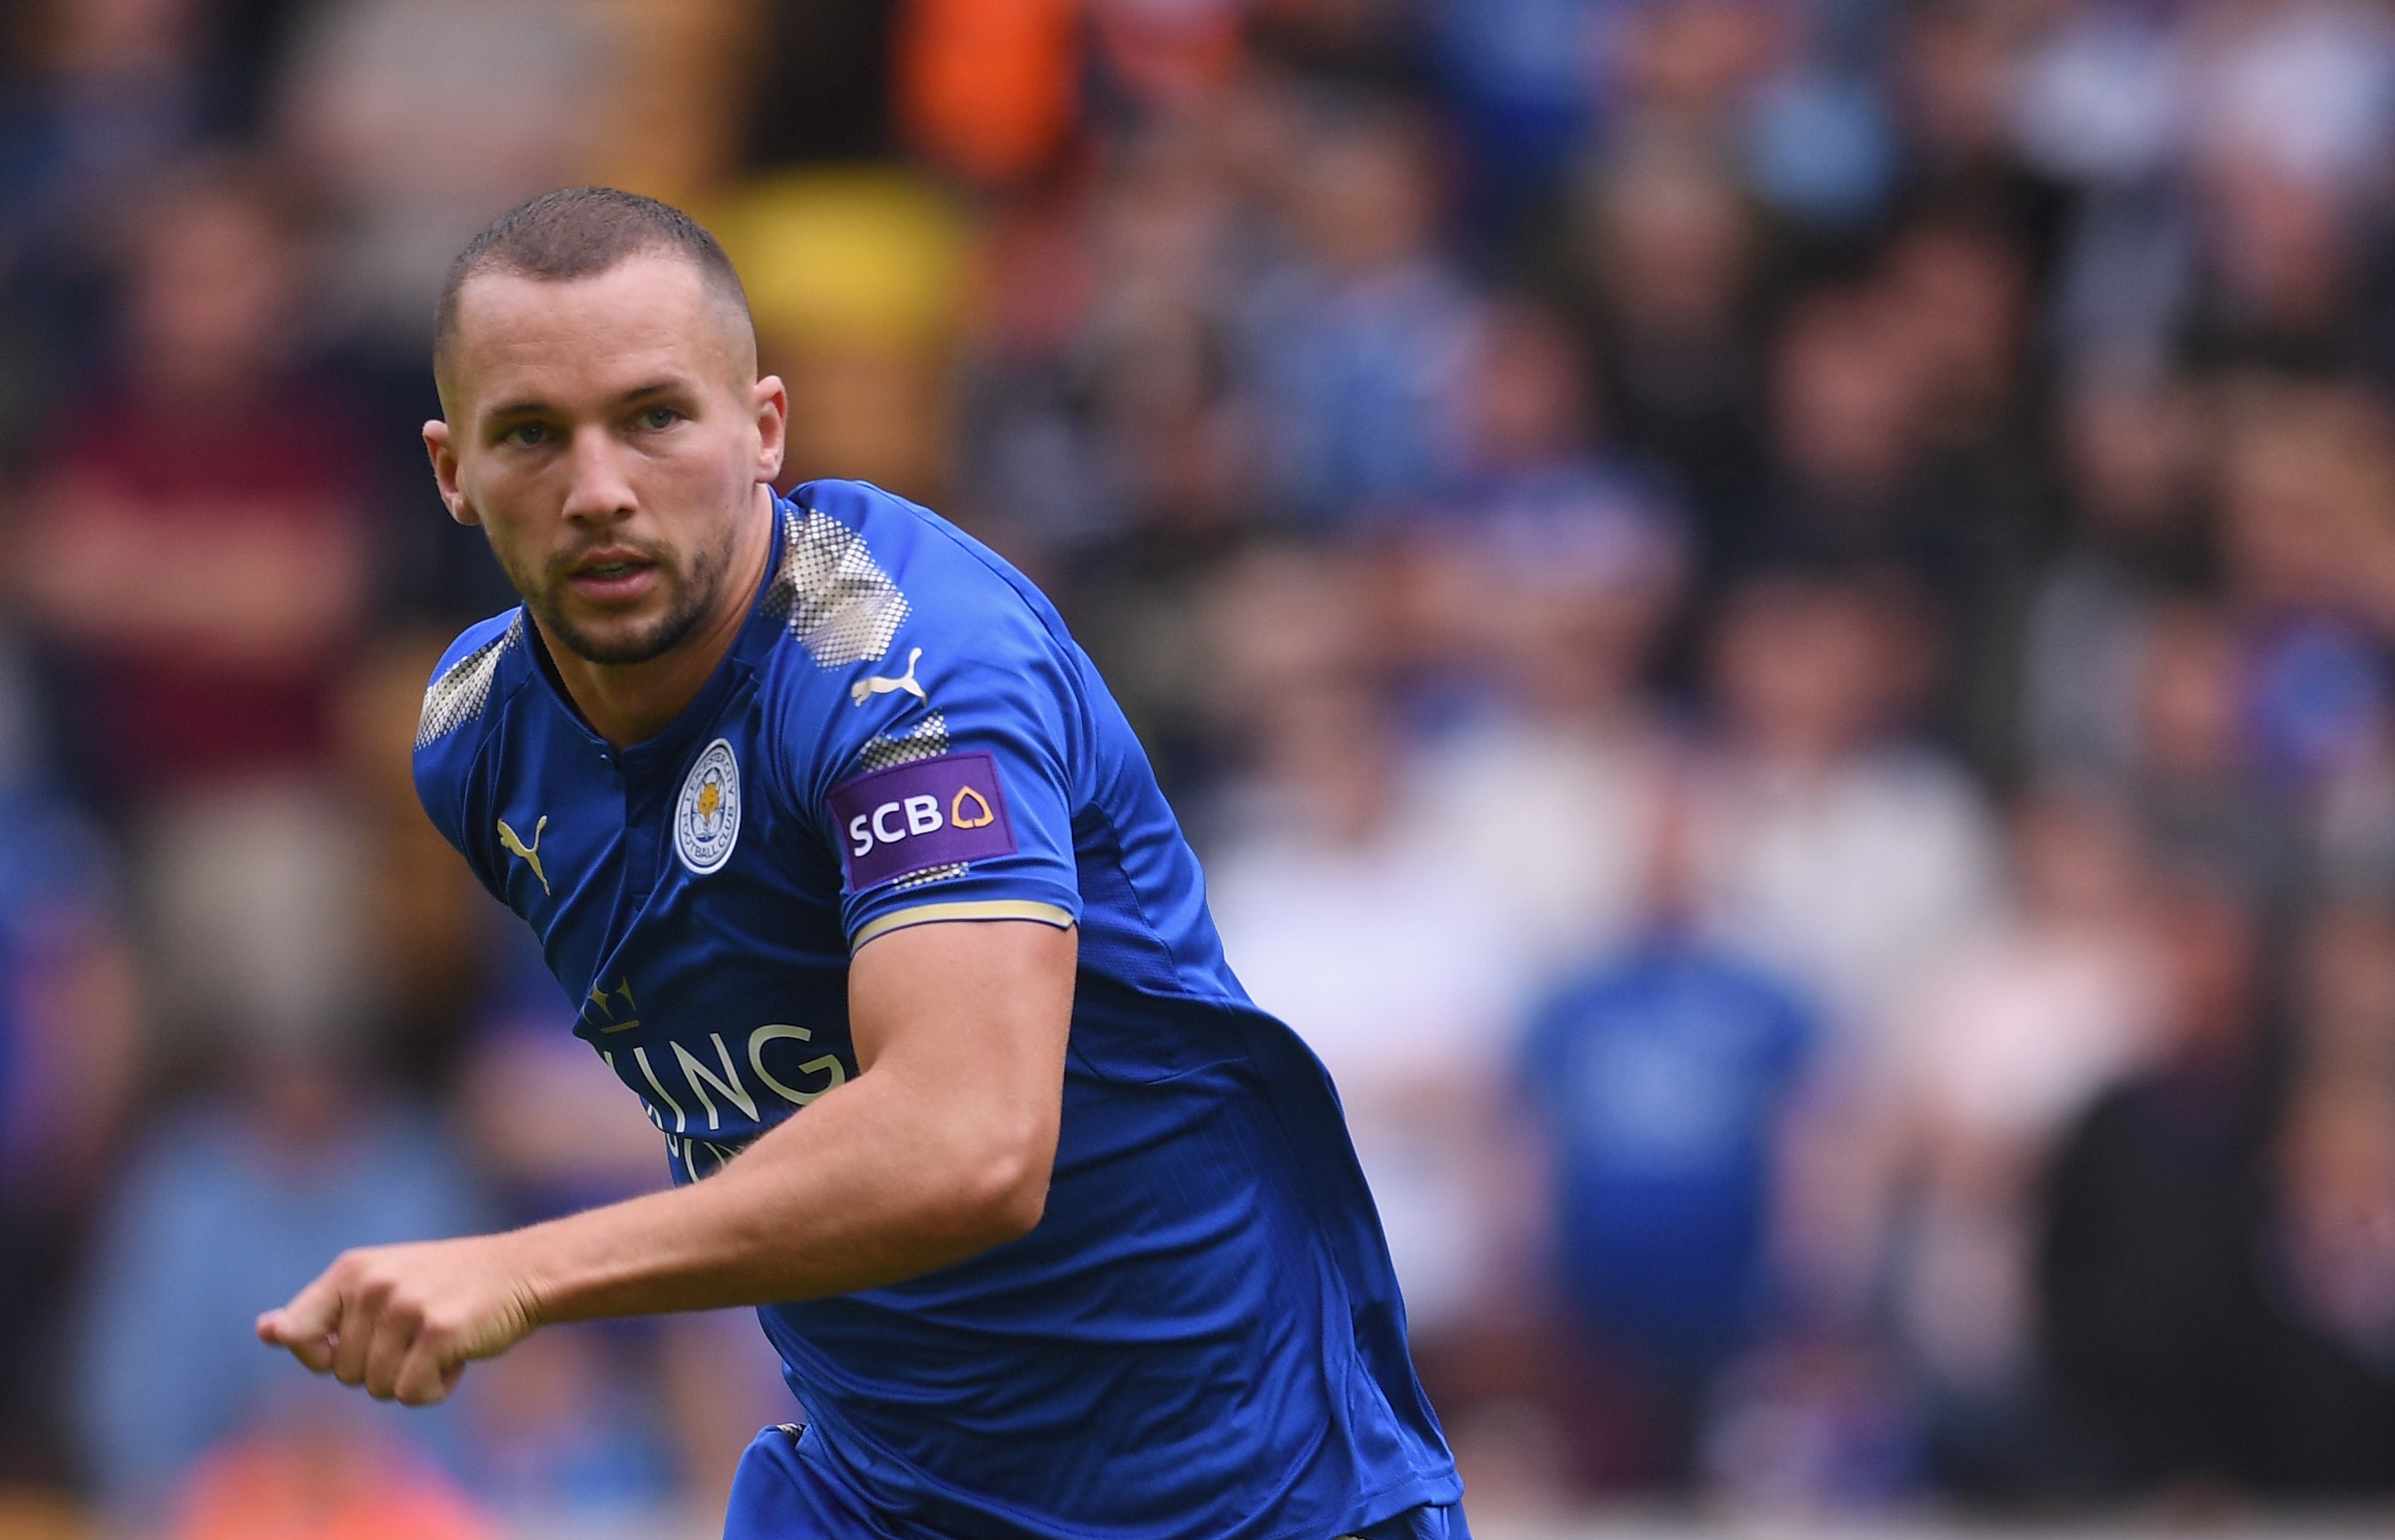 WOLVERHAMPTON, ENGLAND - JULY 29:  Danny Drinkwater of Leicester in action during the pre-season friendly match between Wolverhampton Wanderers and Leicester City at Molineux on July 29, 2017 in Wolverhampton, England.  (Photo by Michael Regan/Getty Images)